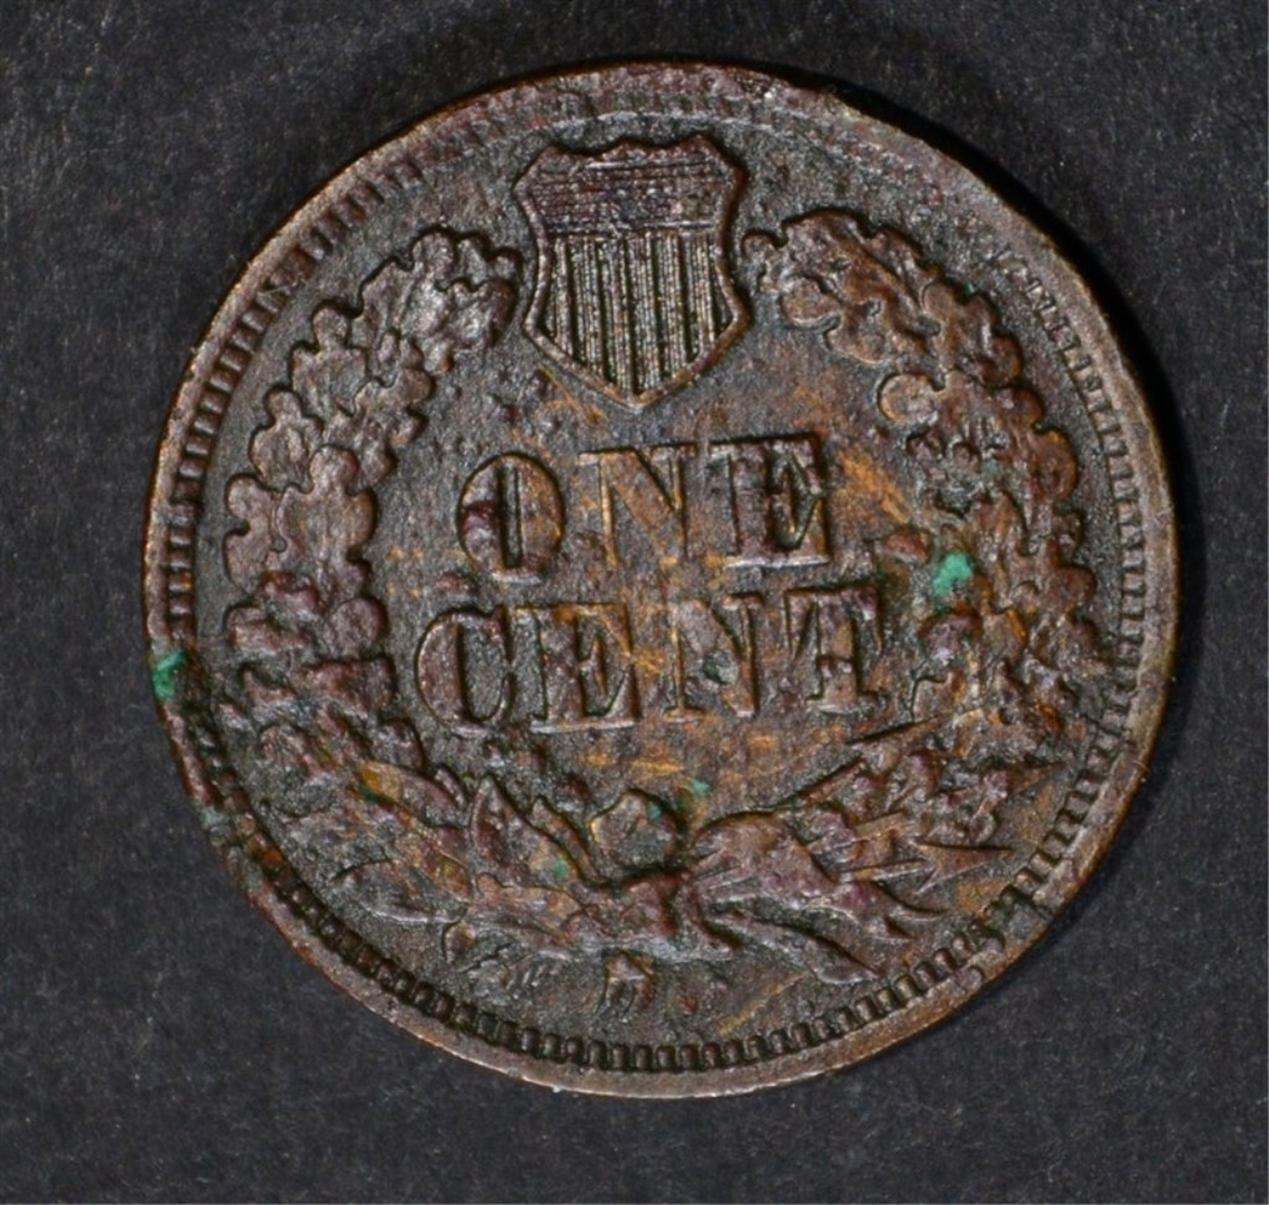 1869 INDIAN CENT XF corroded